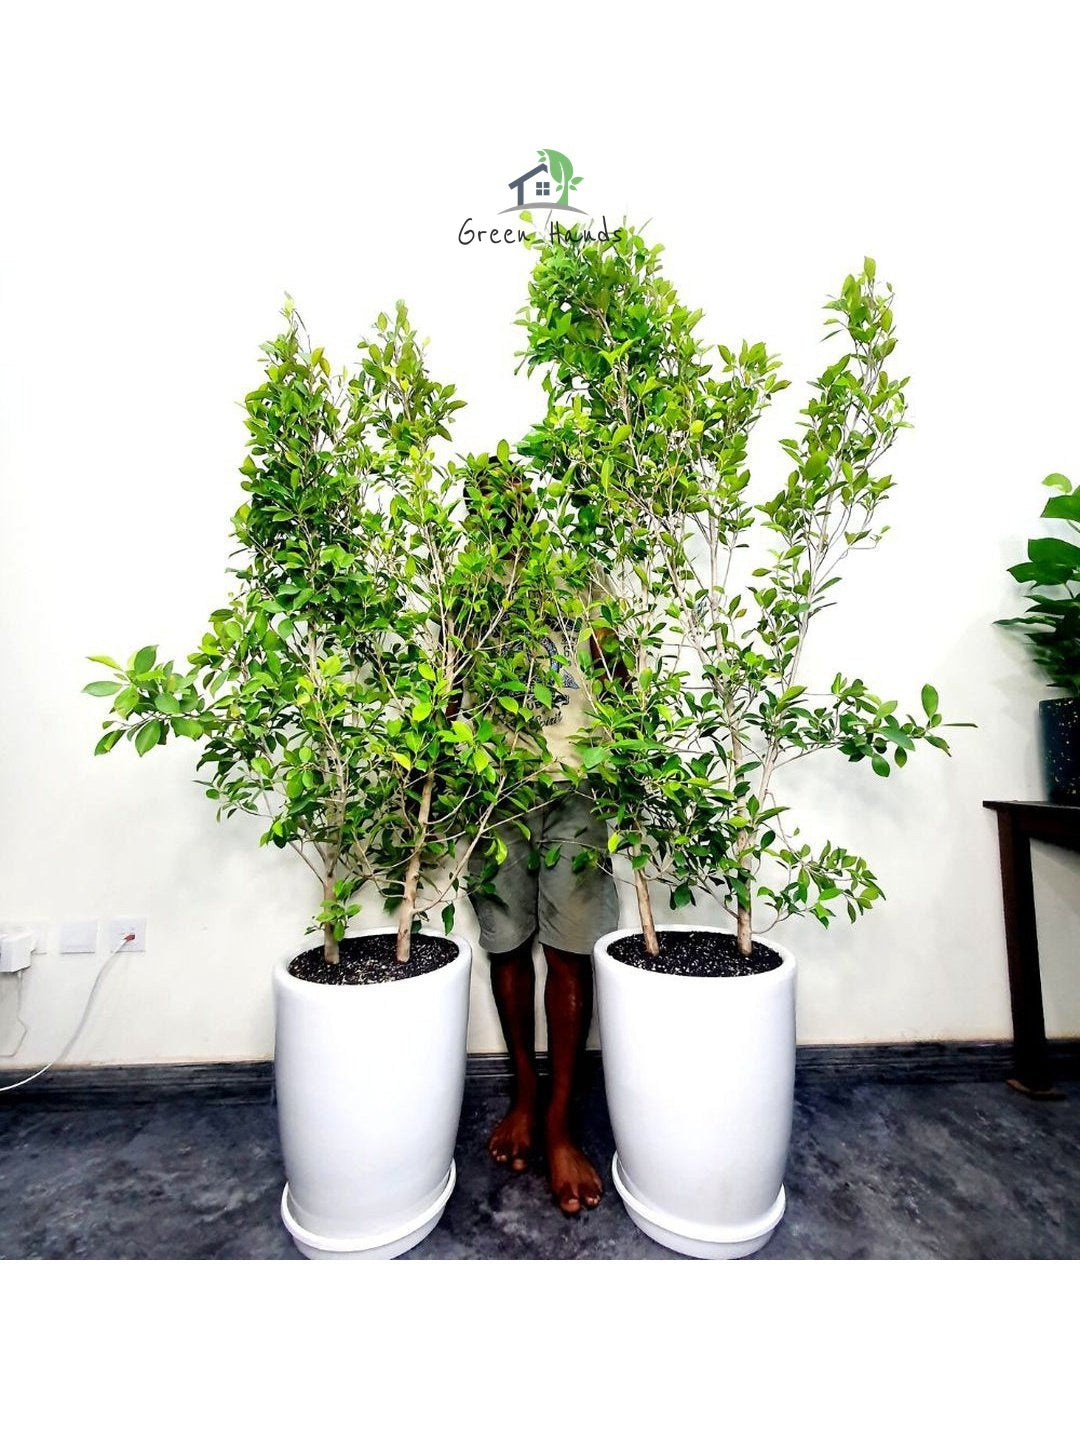 XL Potted Ficus - Set of 2: The Ultimate Outdoor Privacy Plant